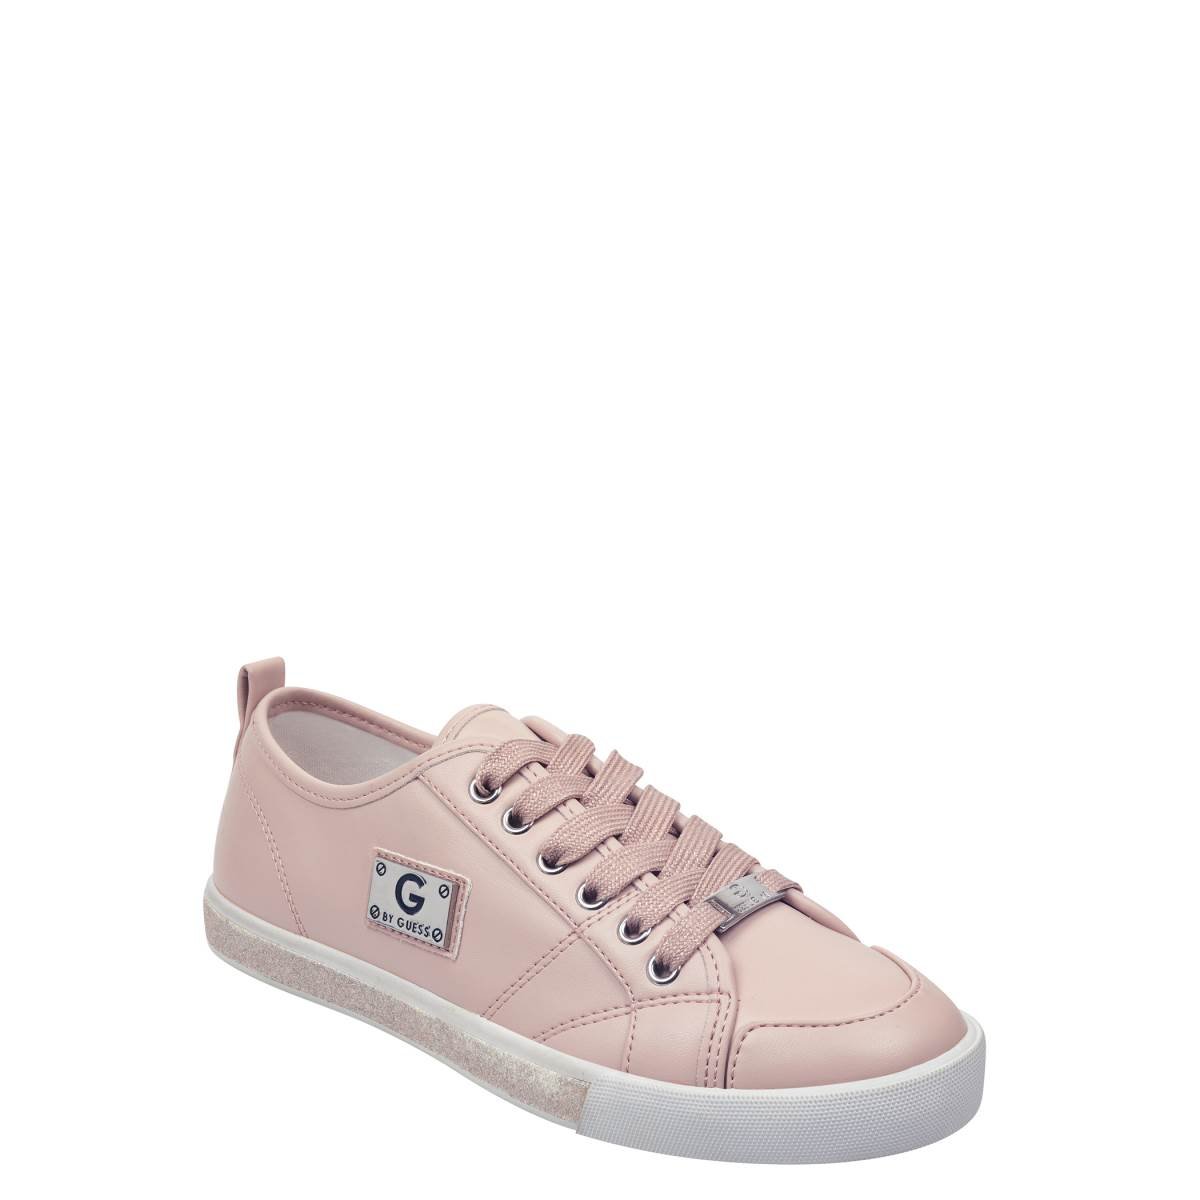 Tenis Flat Rosa G By Guess